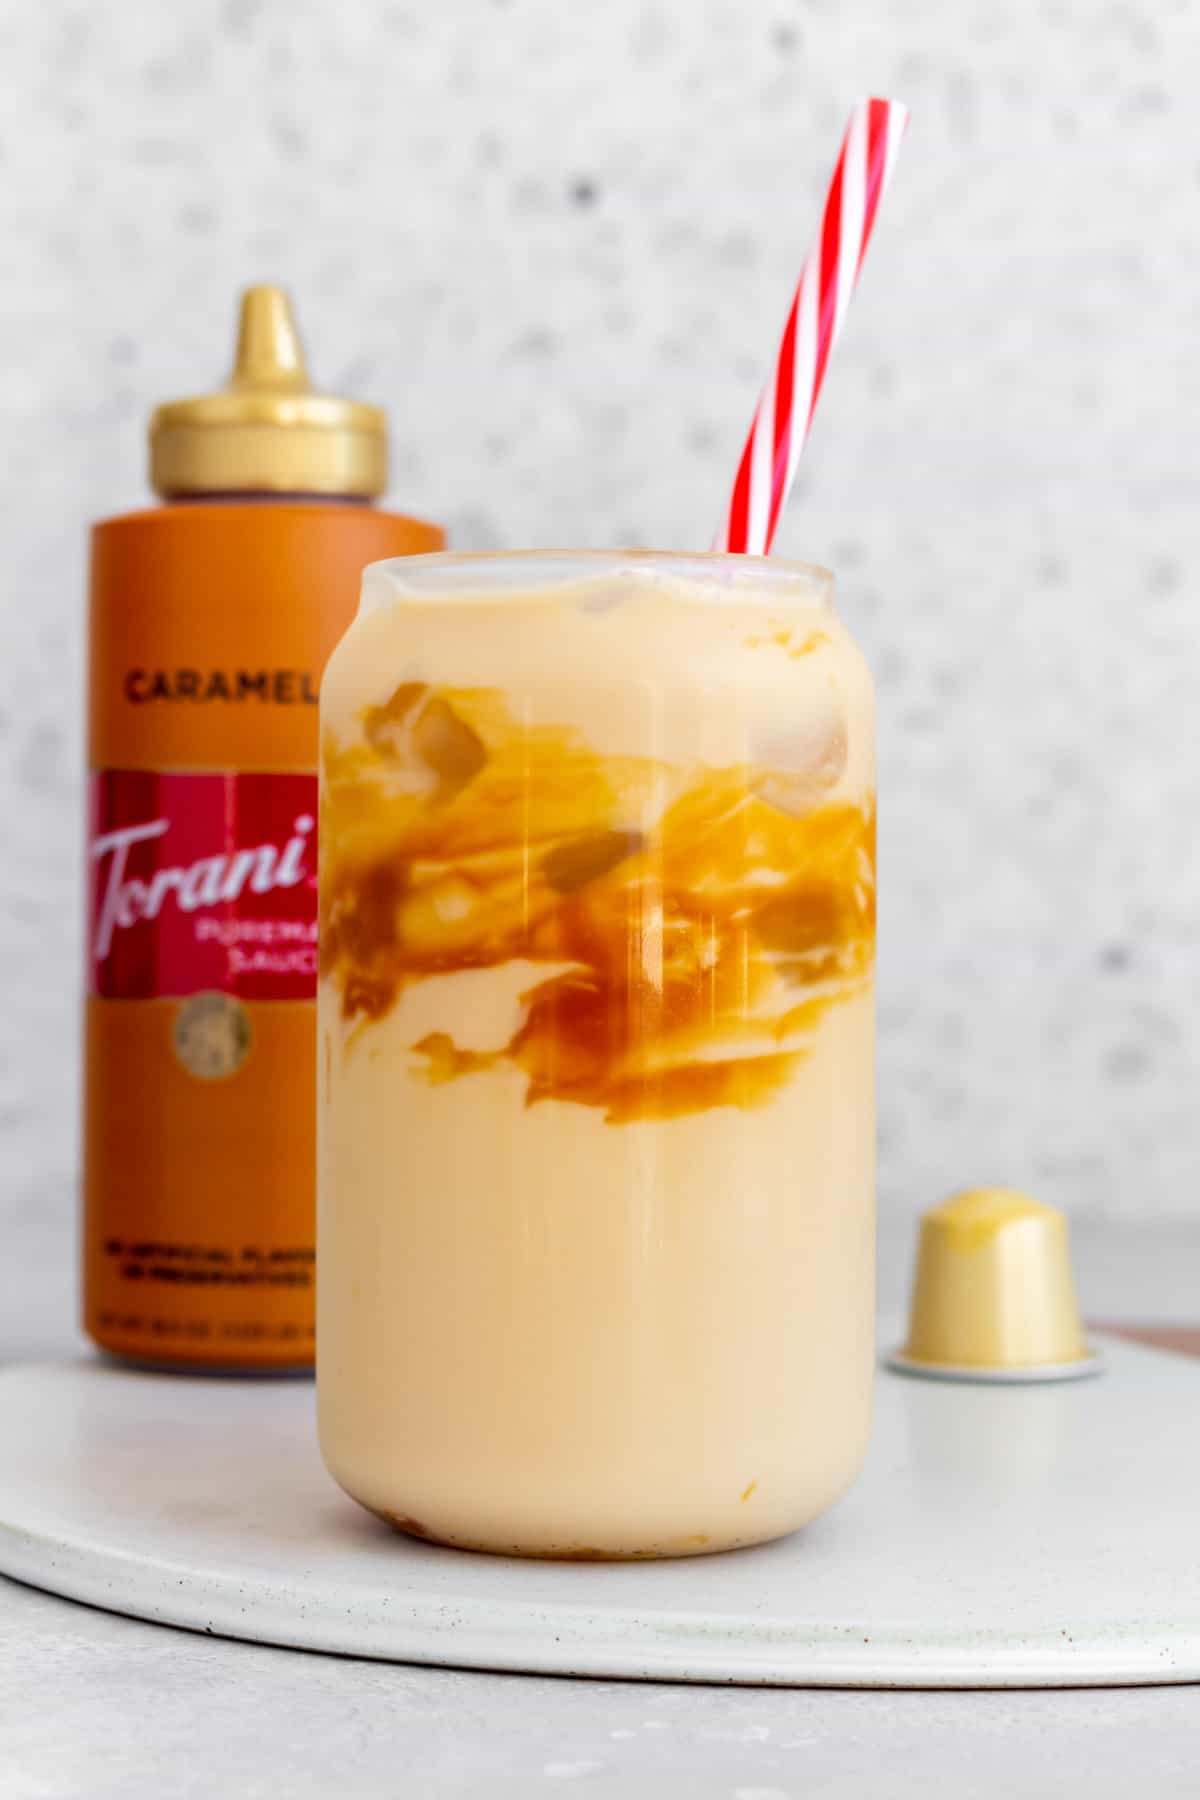 A glass of caramel macchiato with caramel sauce on the glass with a straw. A bottle of caramel sauce in the background.